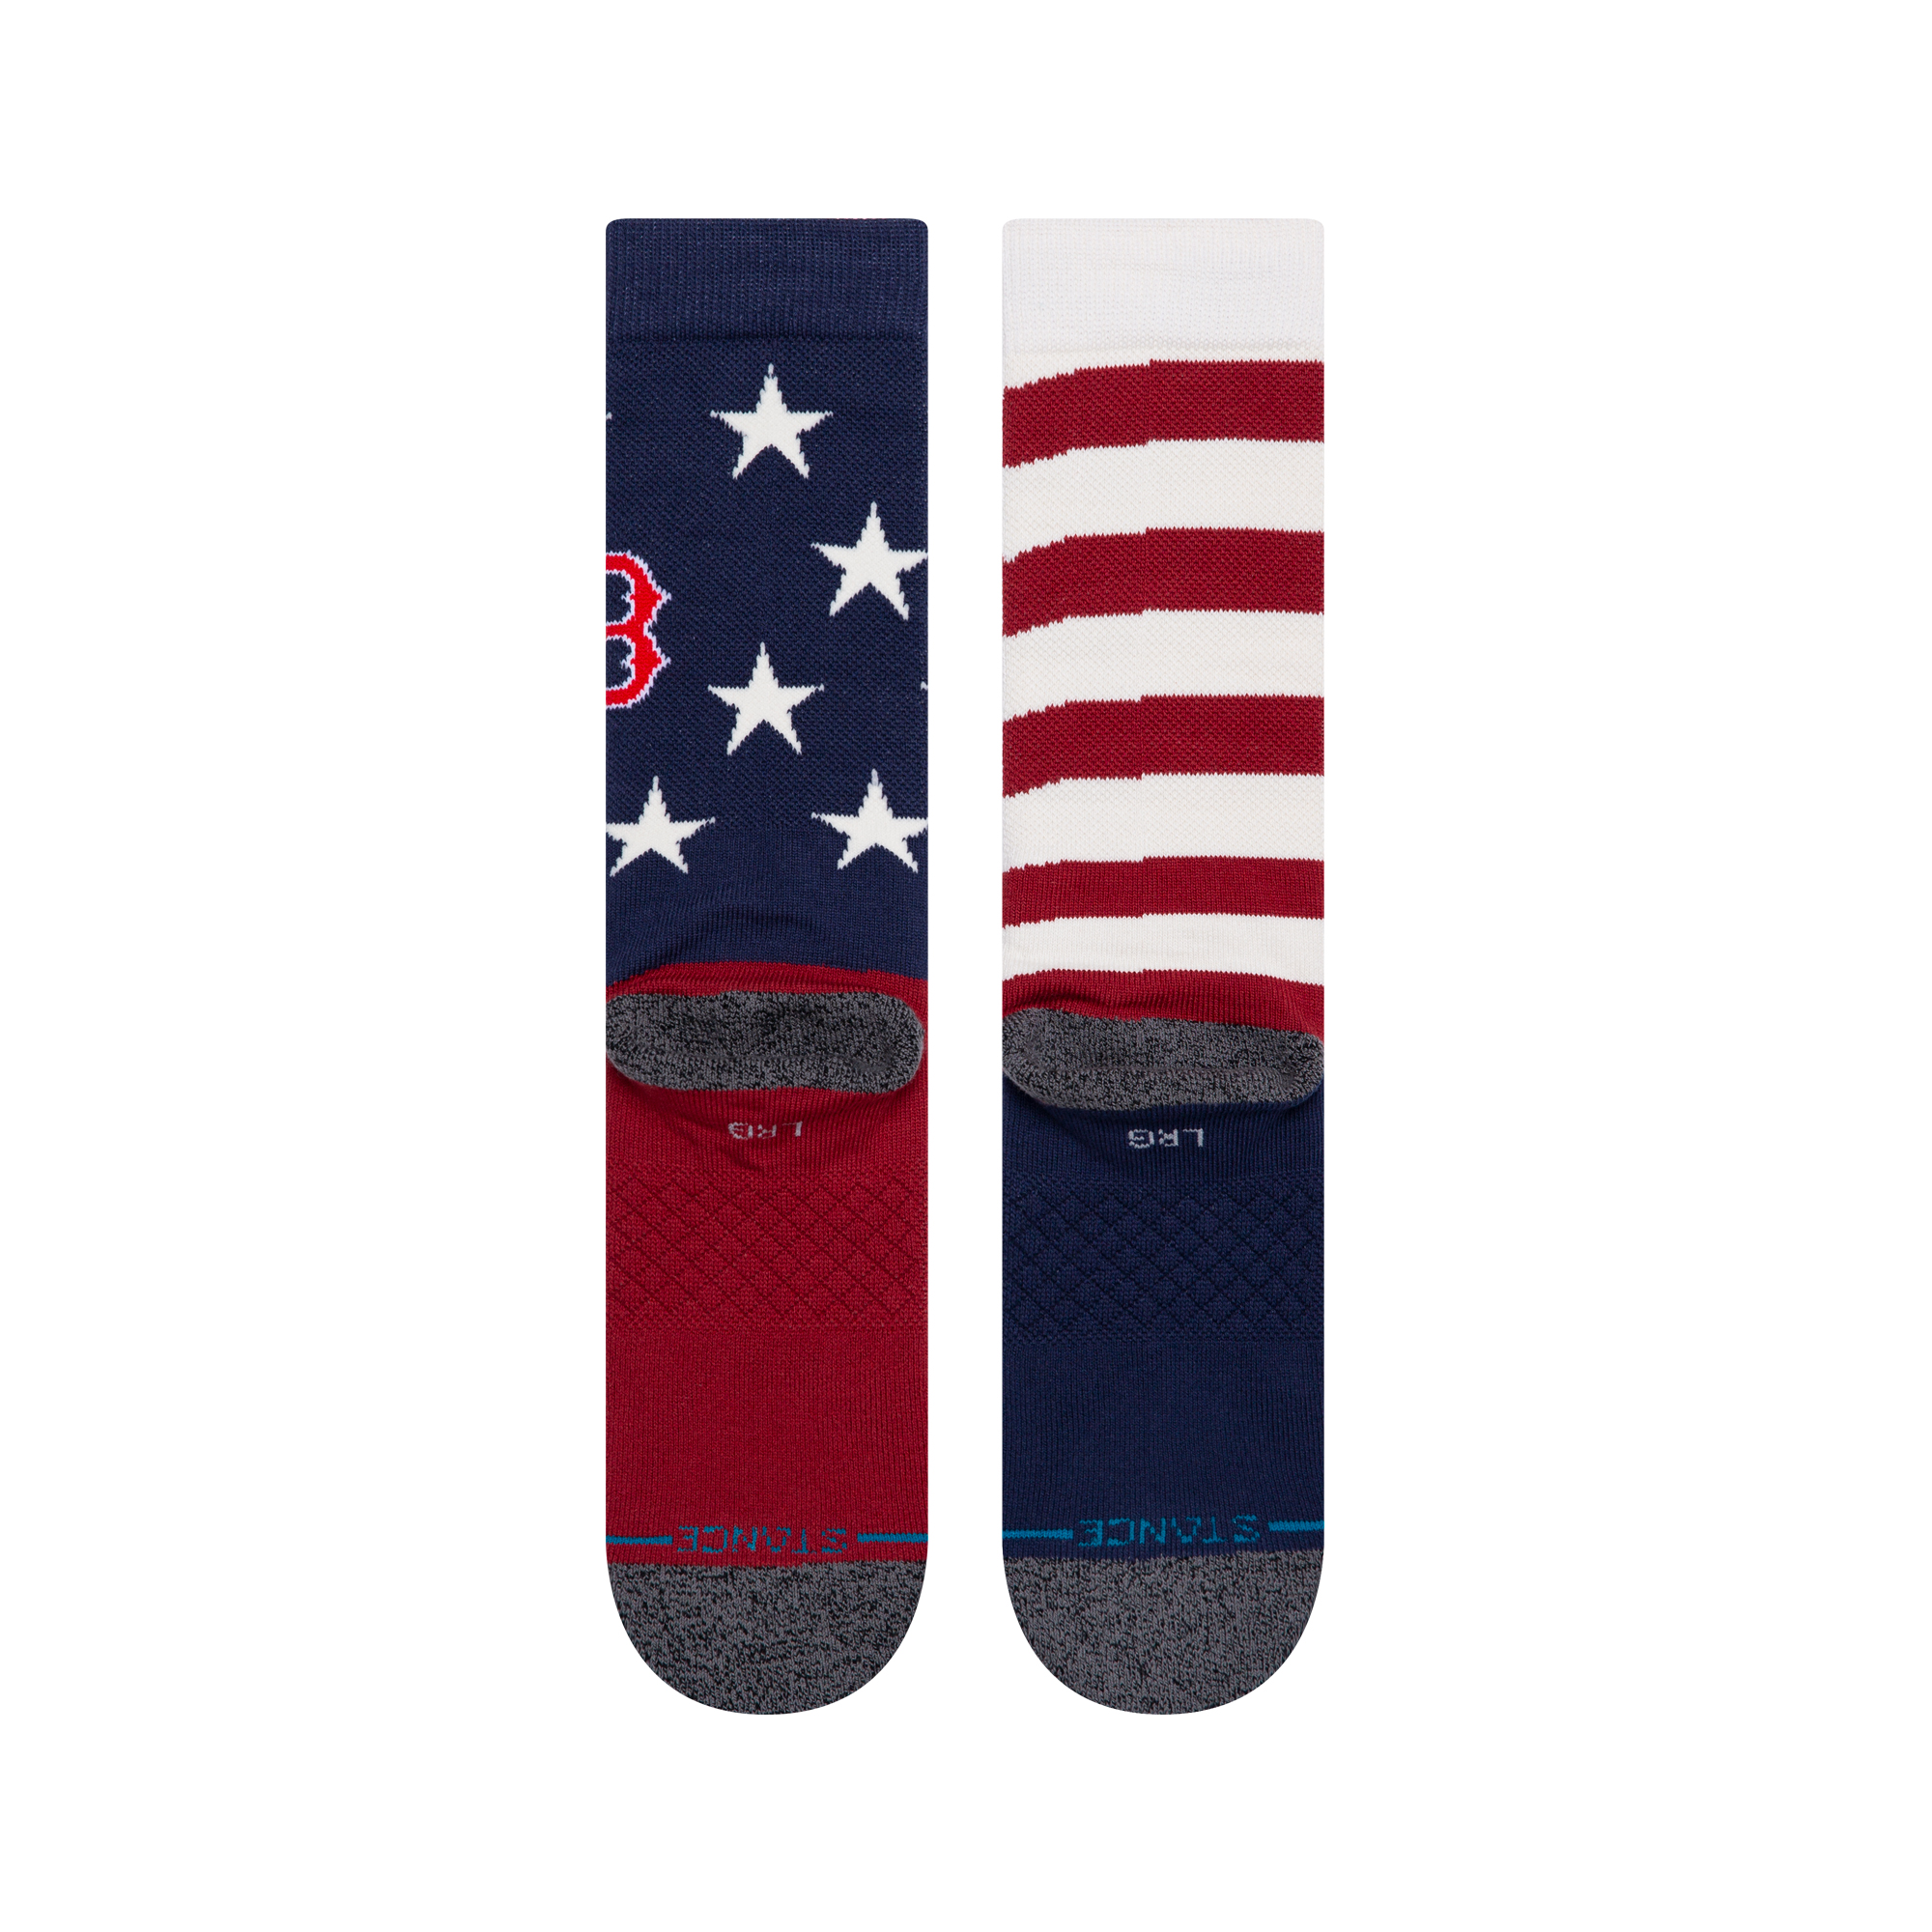 Men's Stance Boston Red Sox City Connect Crew Socks